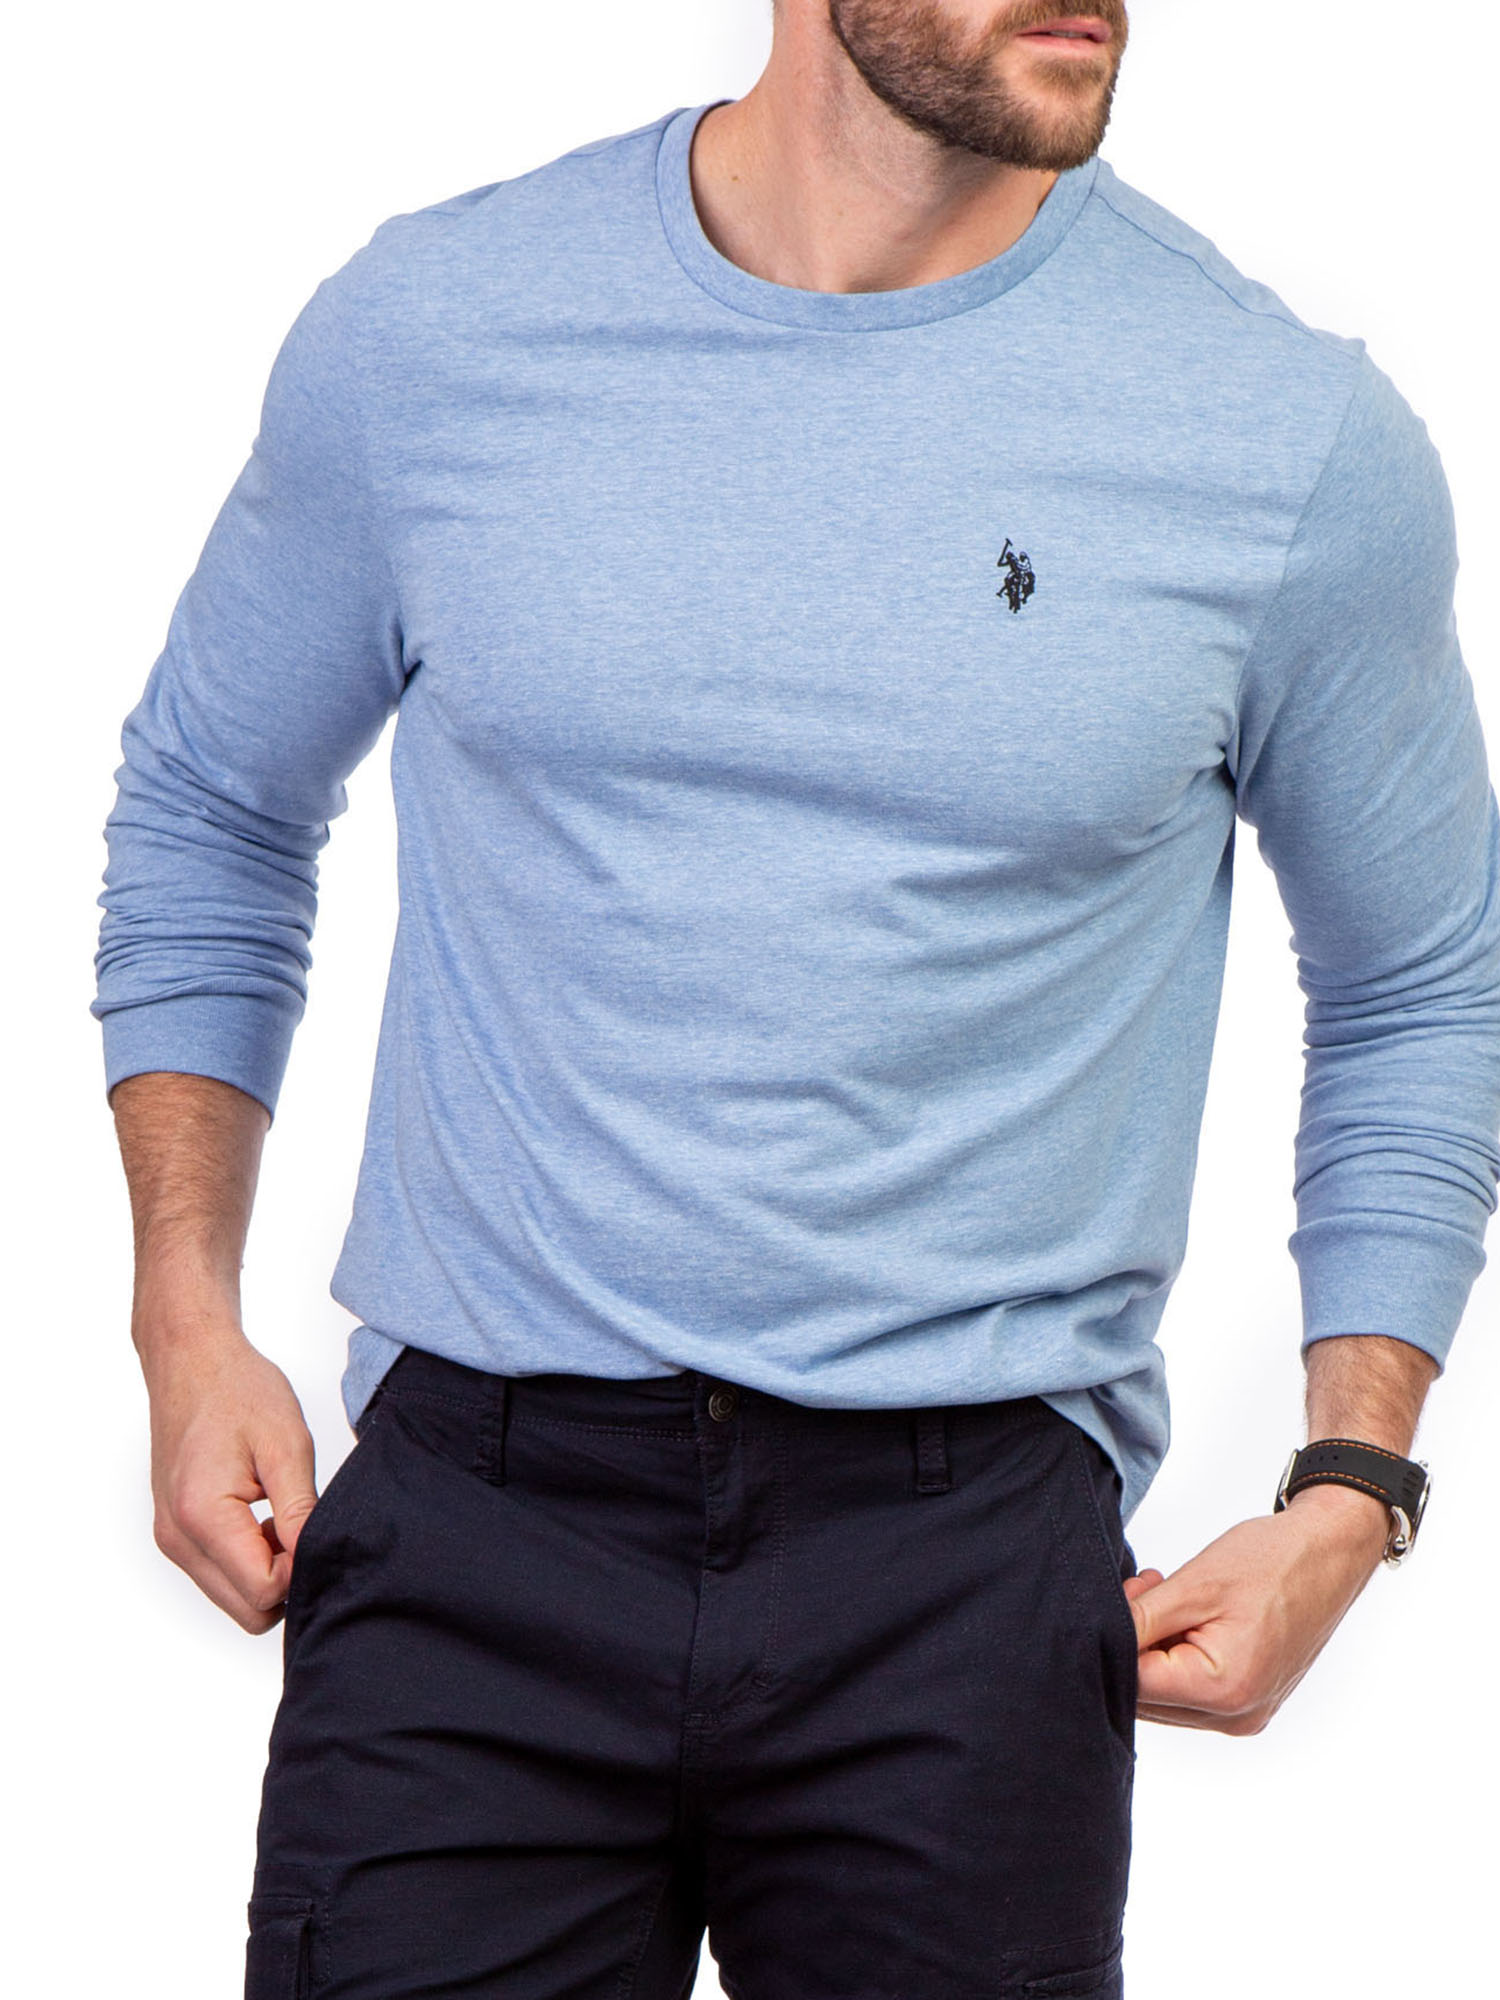 U.S. Polo Assn. Men's Long Sleeve Solid T-Shirt - image 4 of 5